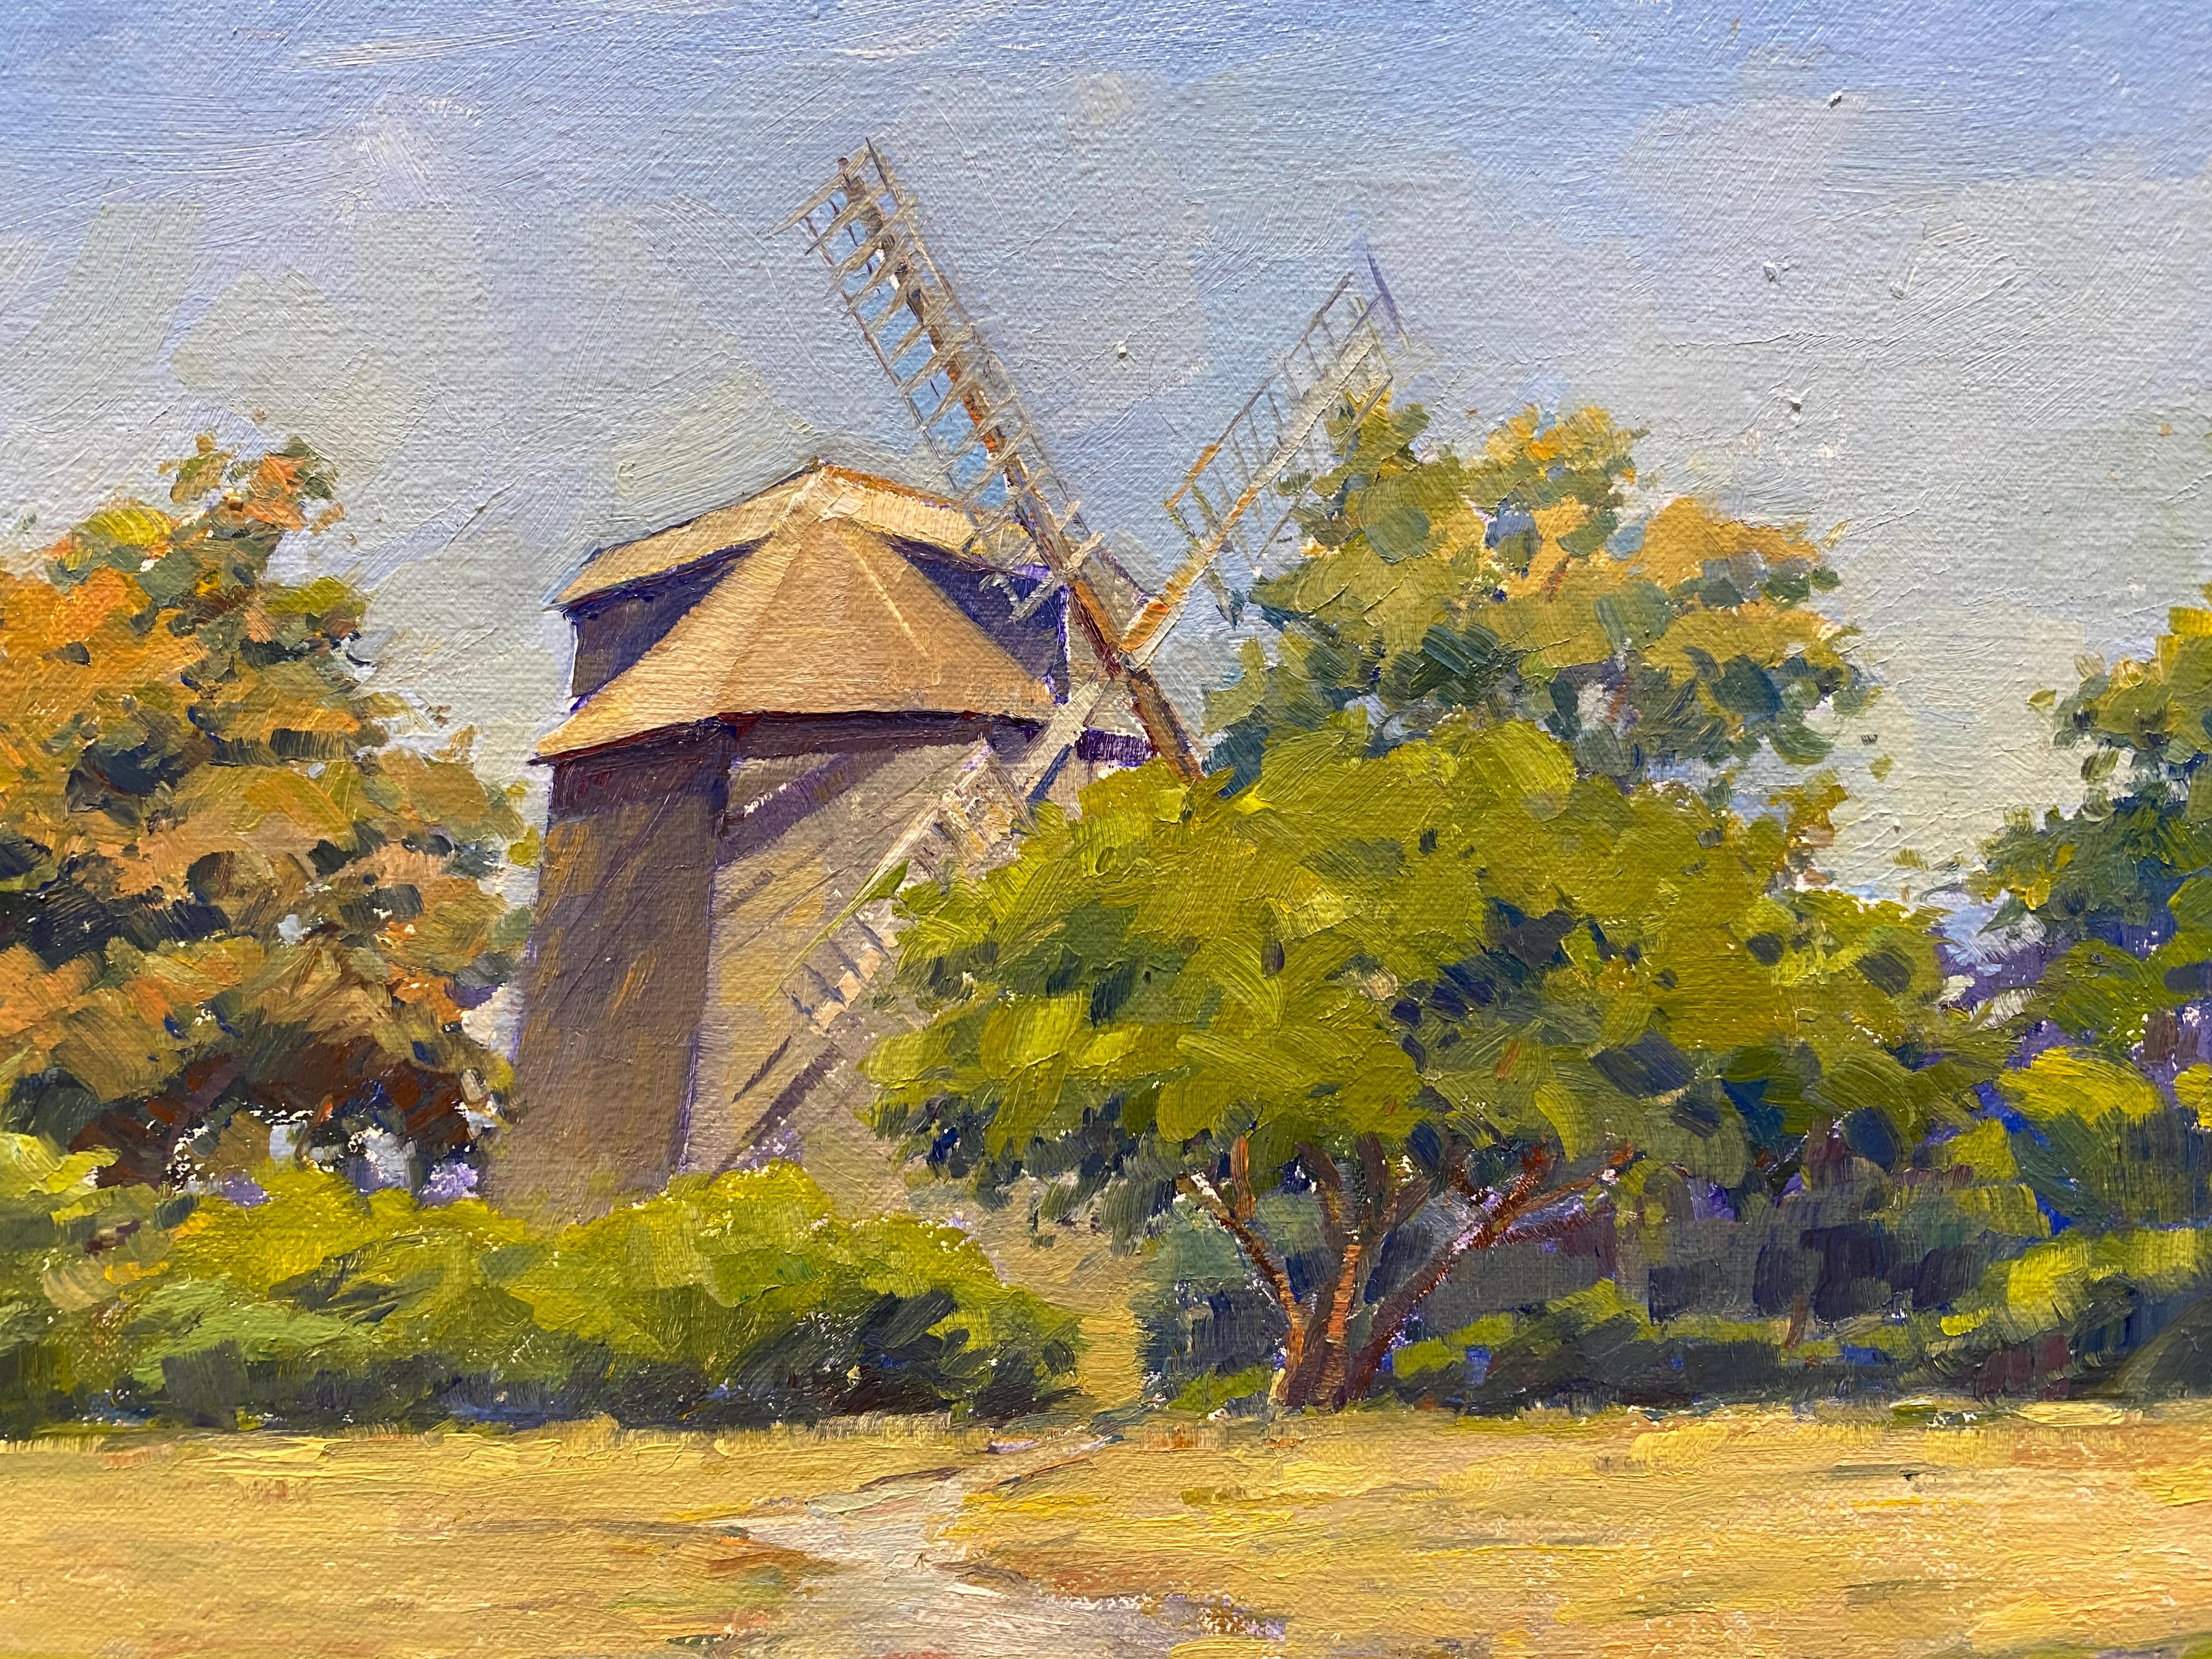 Orsolic Dalessio depicts the iconic landmark of Sag Harbor: its windmill. The plein air painting shows no sign of the bustling town behind. The windmill is cloistered within the puffy impressionistic trees as it faces out onto the blue harbor.